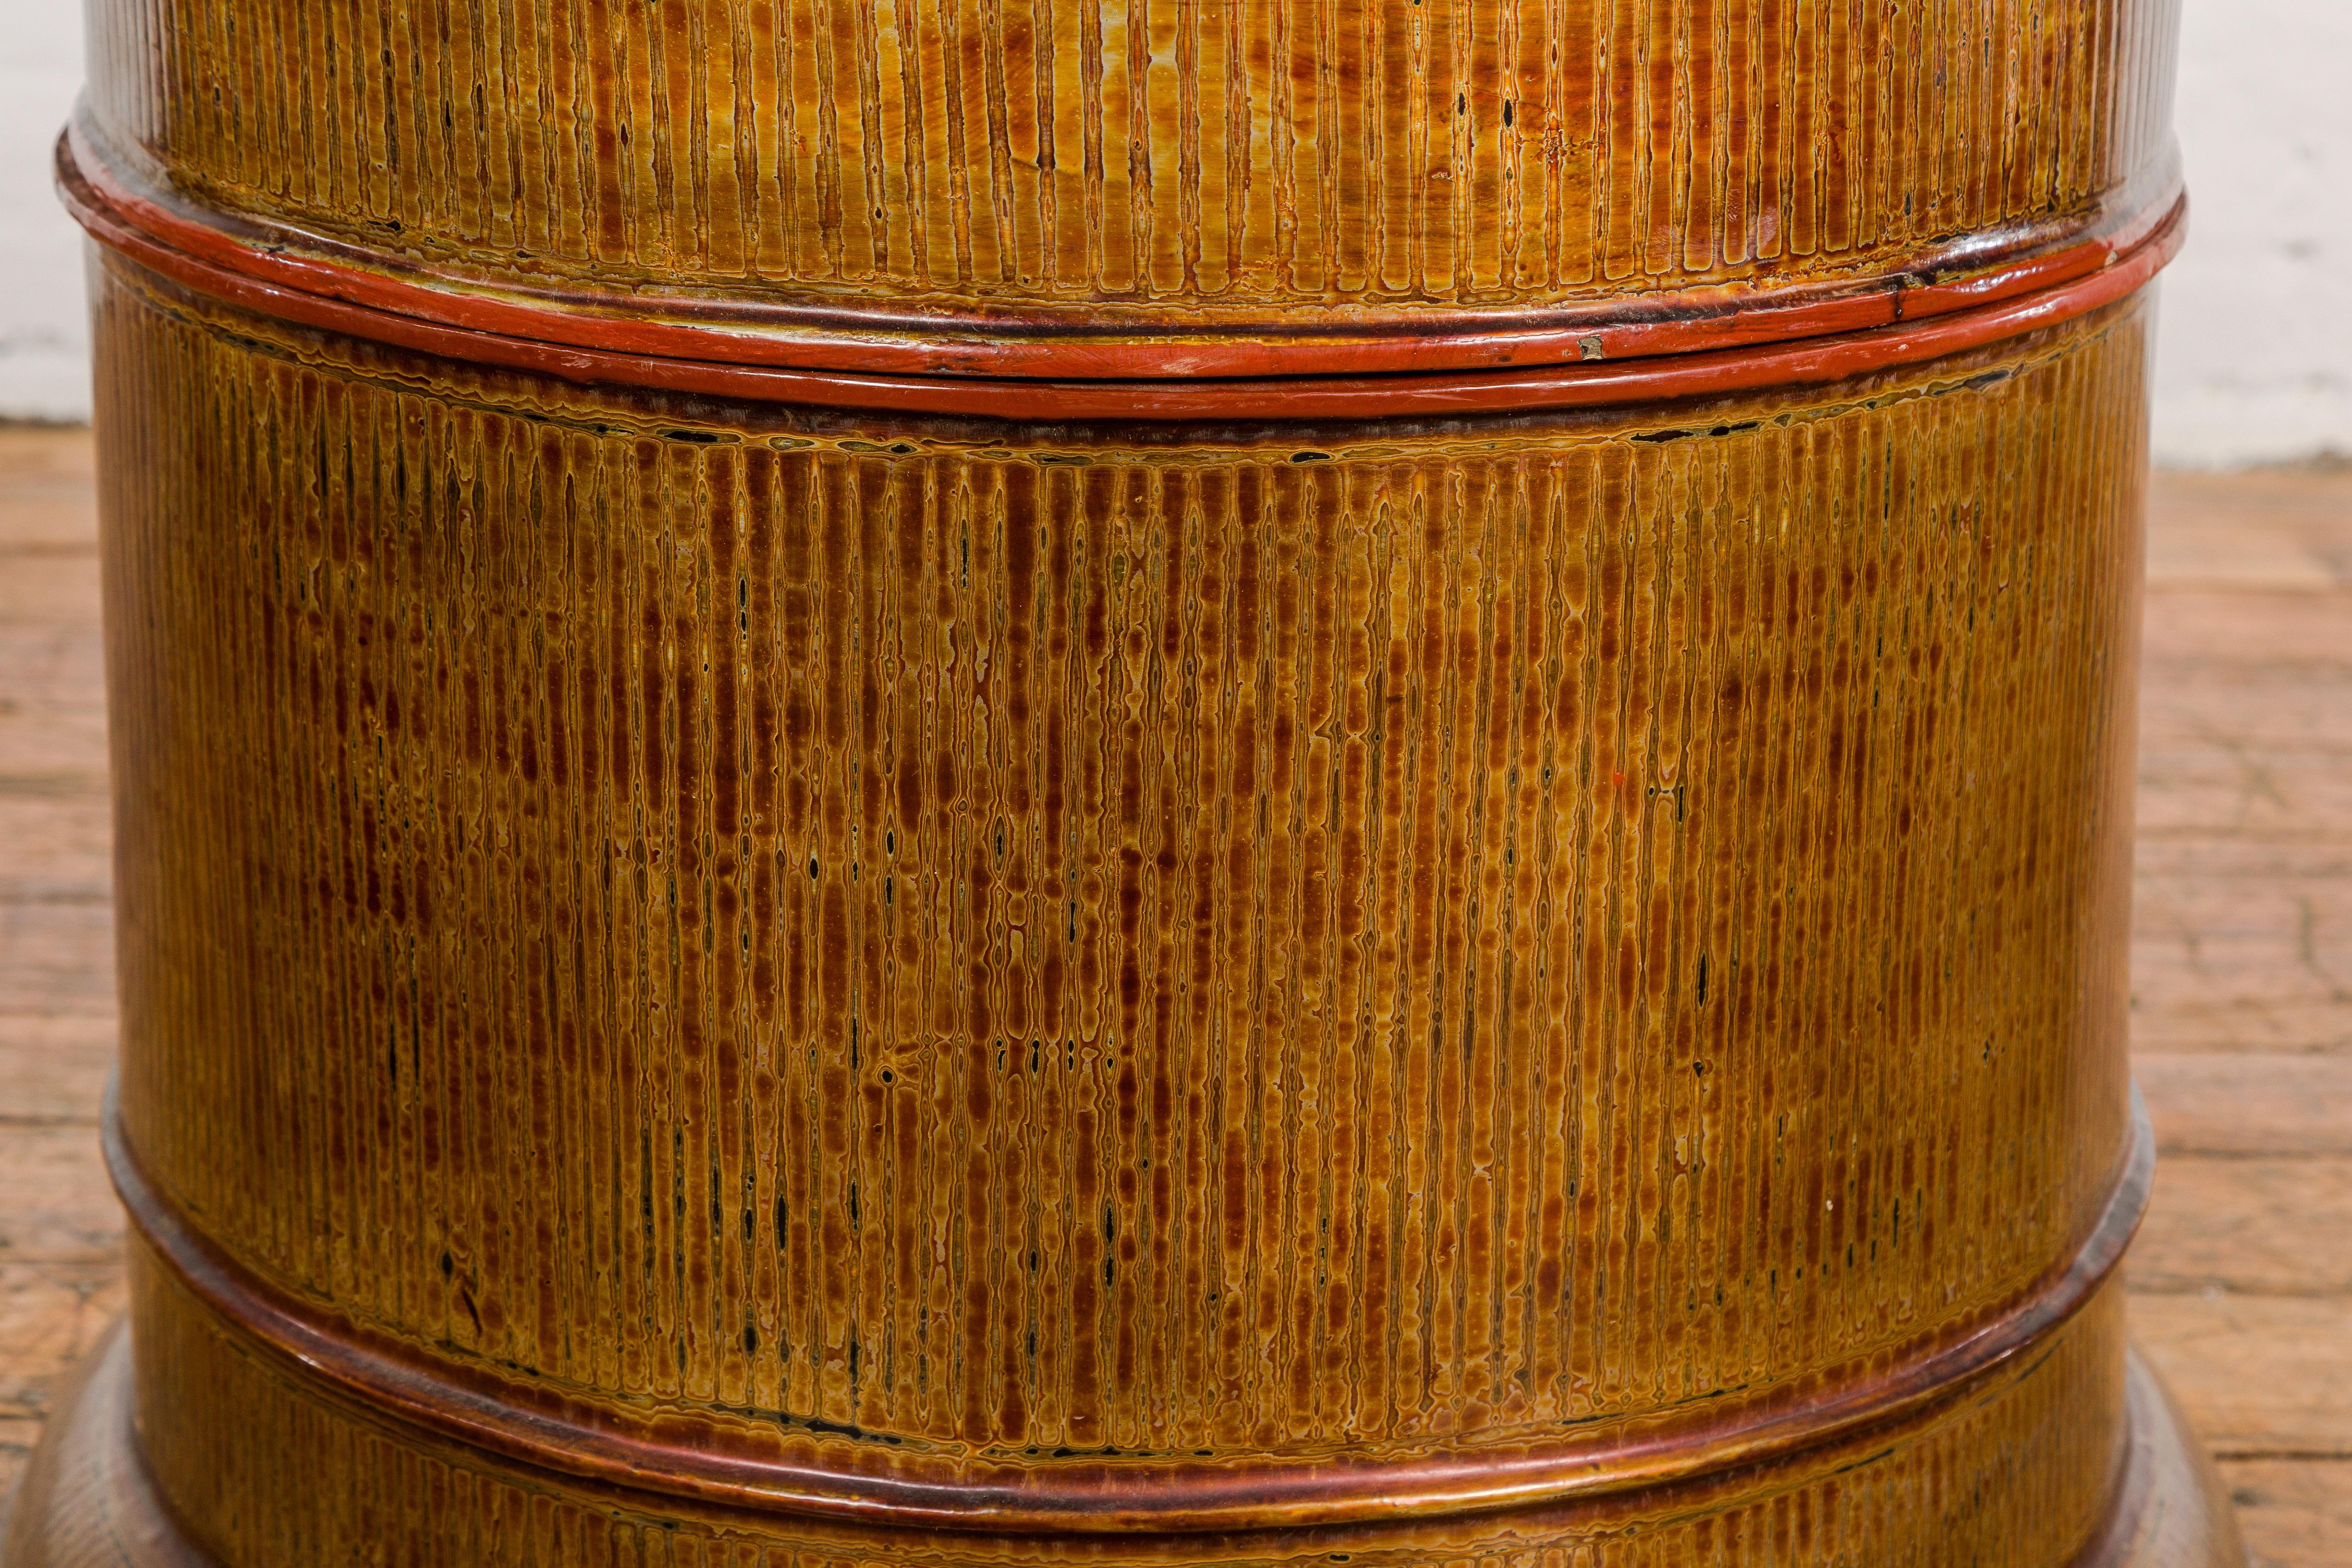 Burmese Vintage Negora Lacquer Circular Storage Bin with Vertical Stripes In Good Condition For Sale In Yonkers, NY